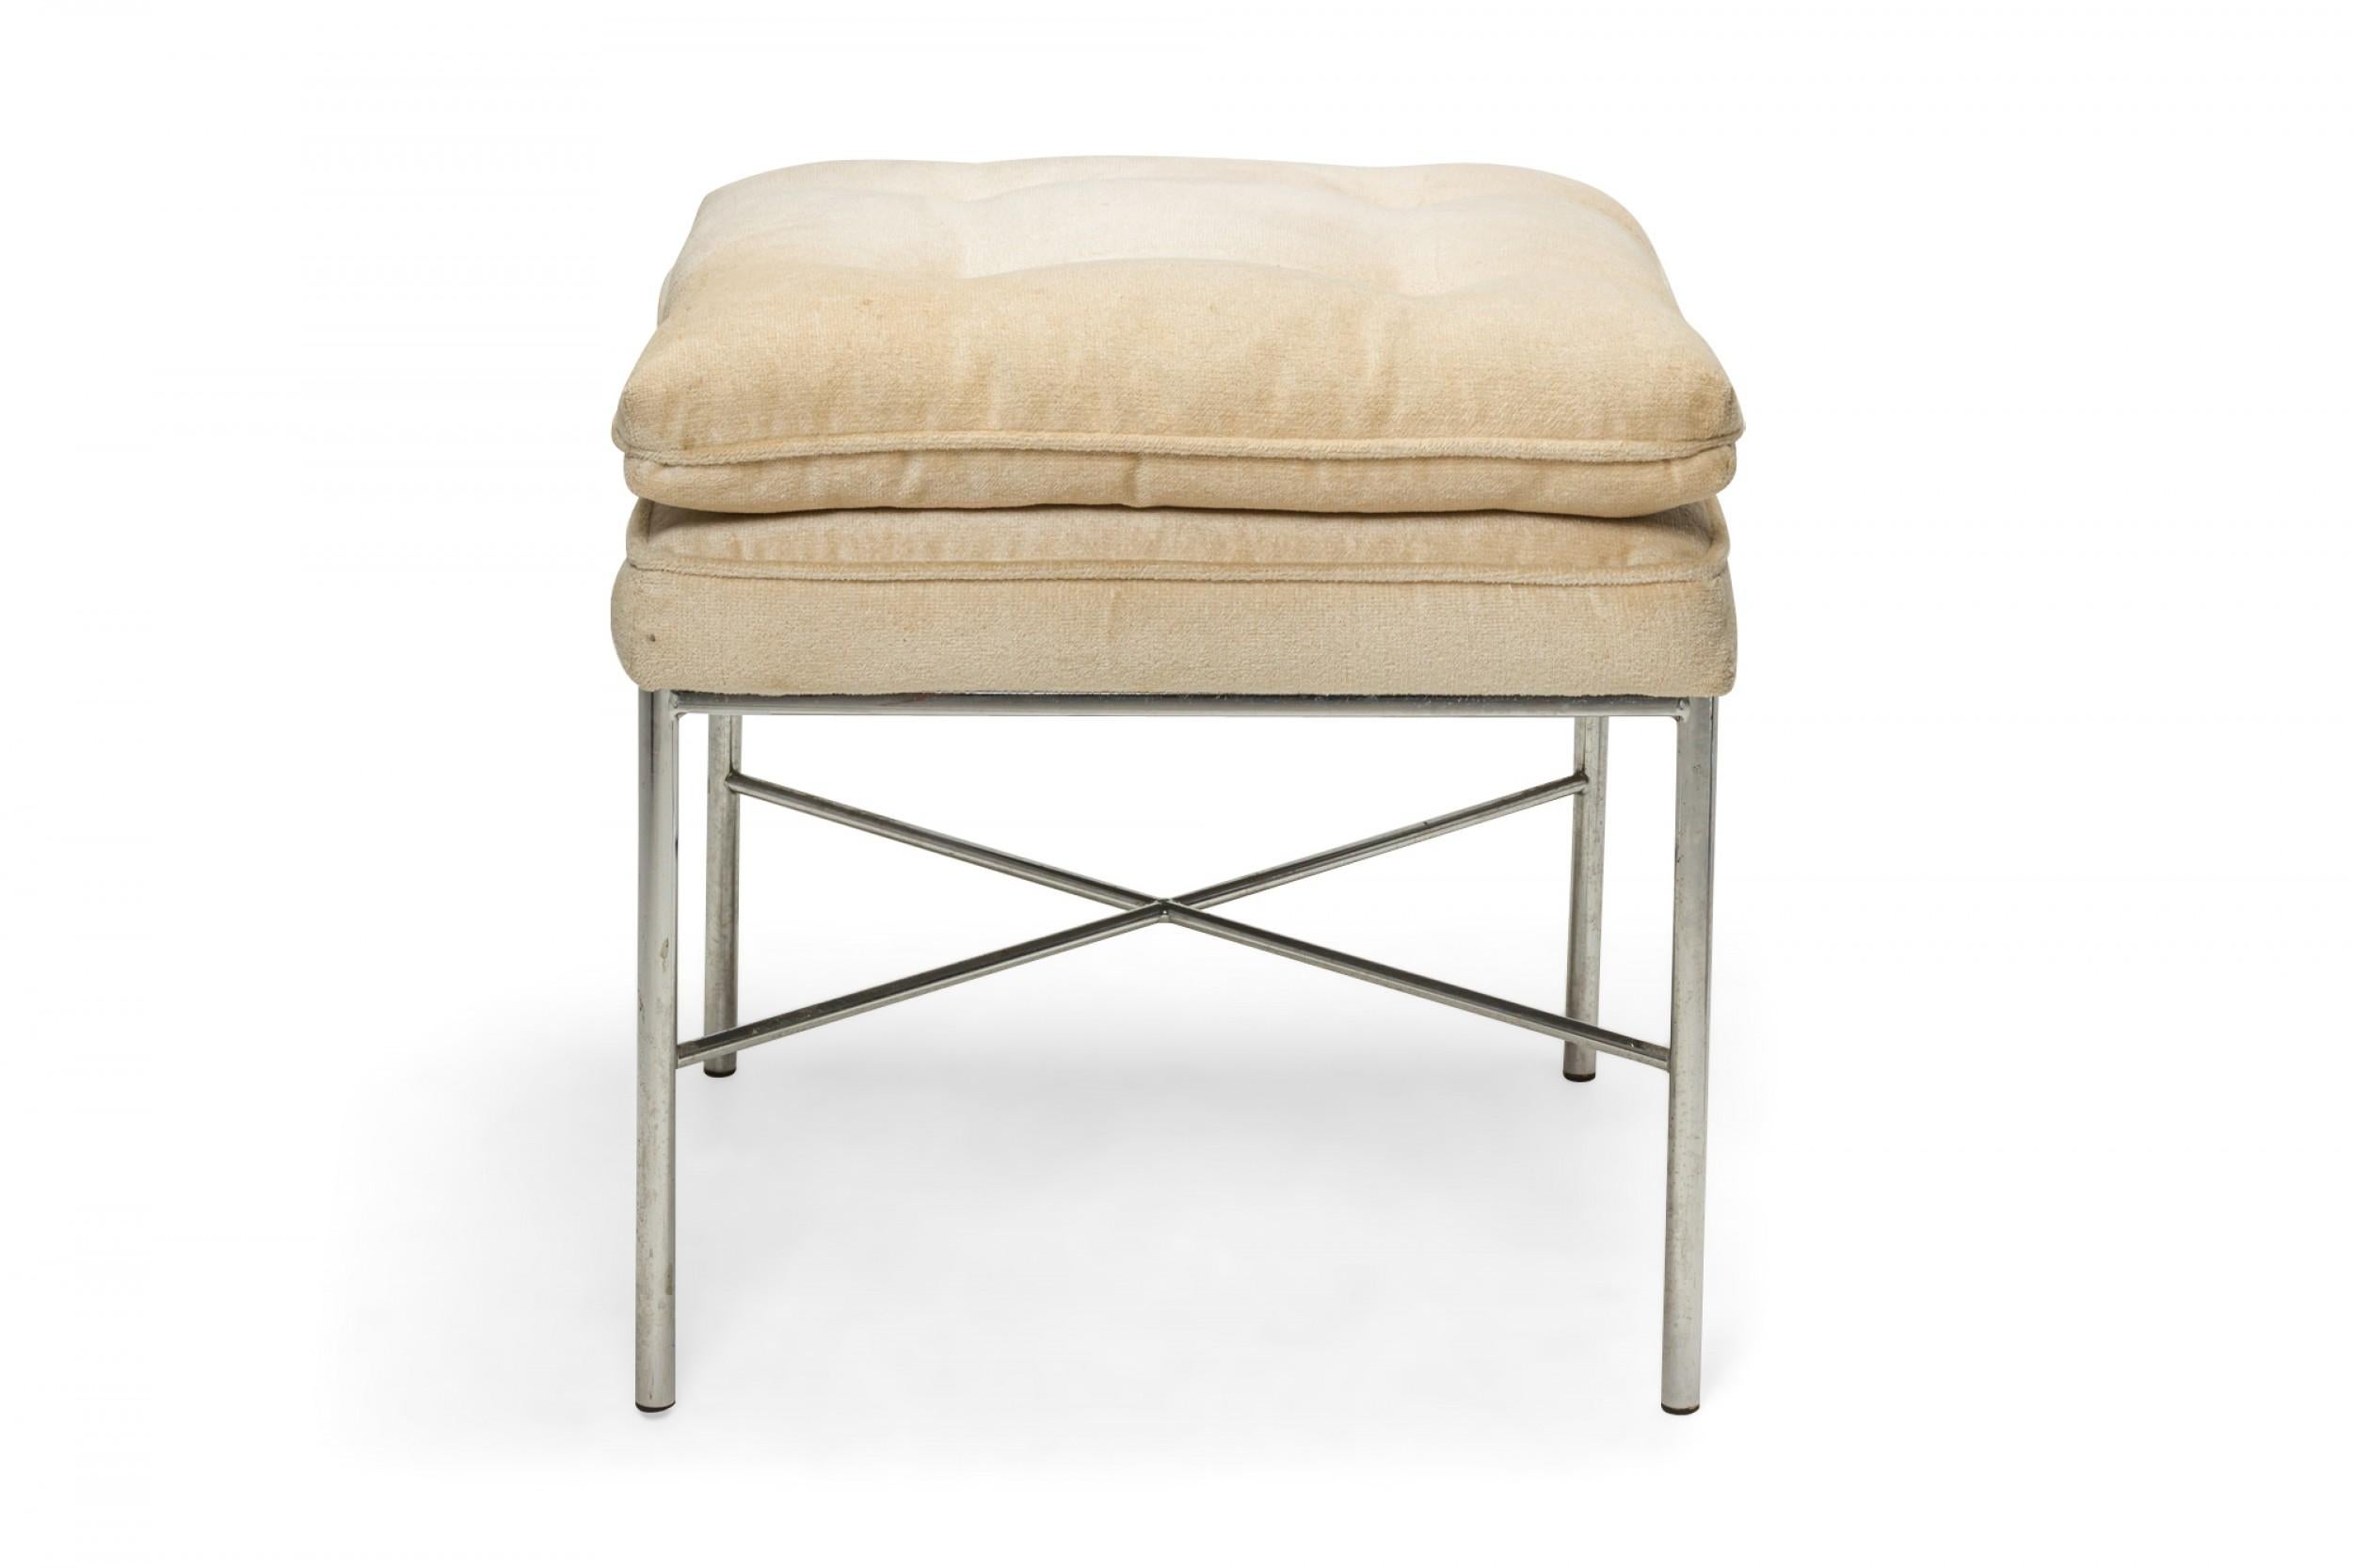 American Mid-Century square bench with a chrome tube frame with x-shaped stretcher topped with a double cushioned beige fabric upholstered seat. (manner of DESIGN INSTITUTE OF AMERICA).